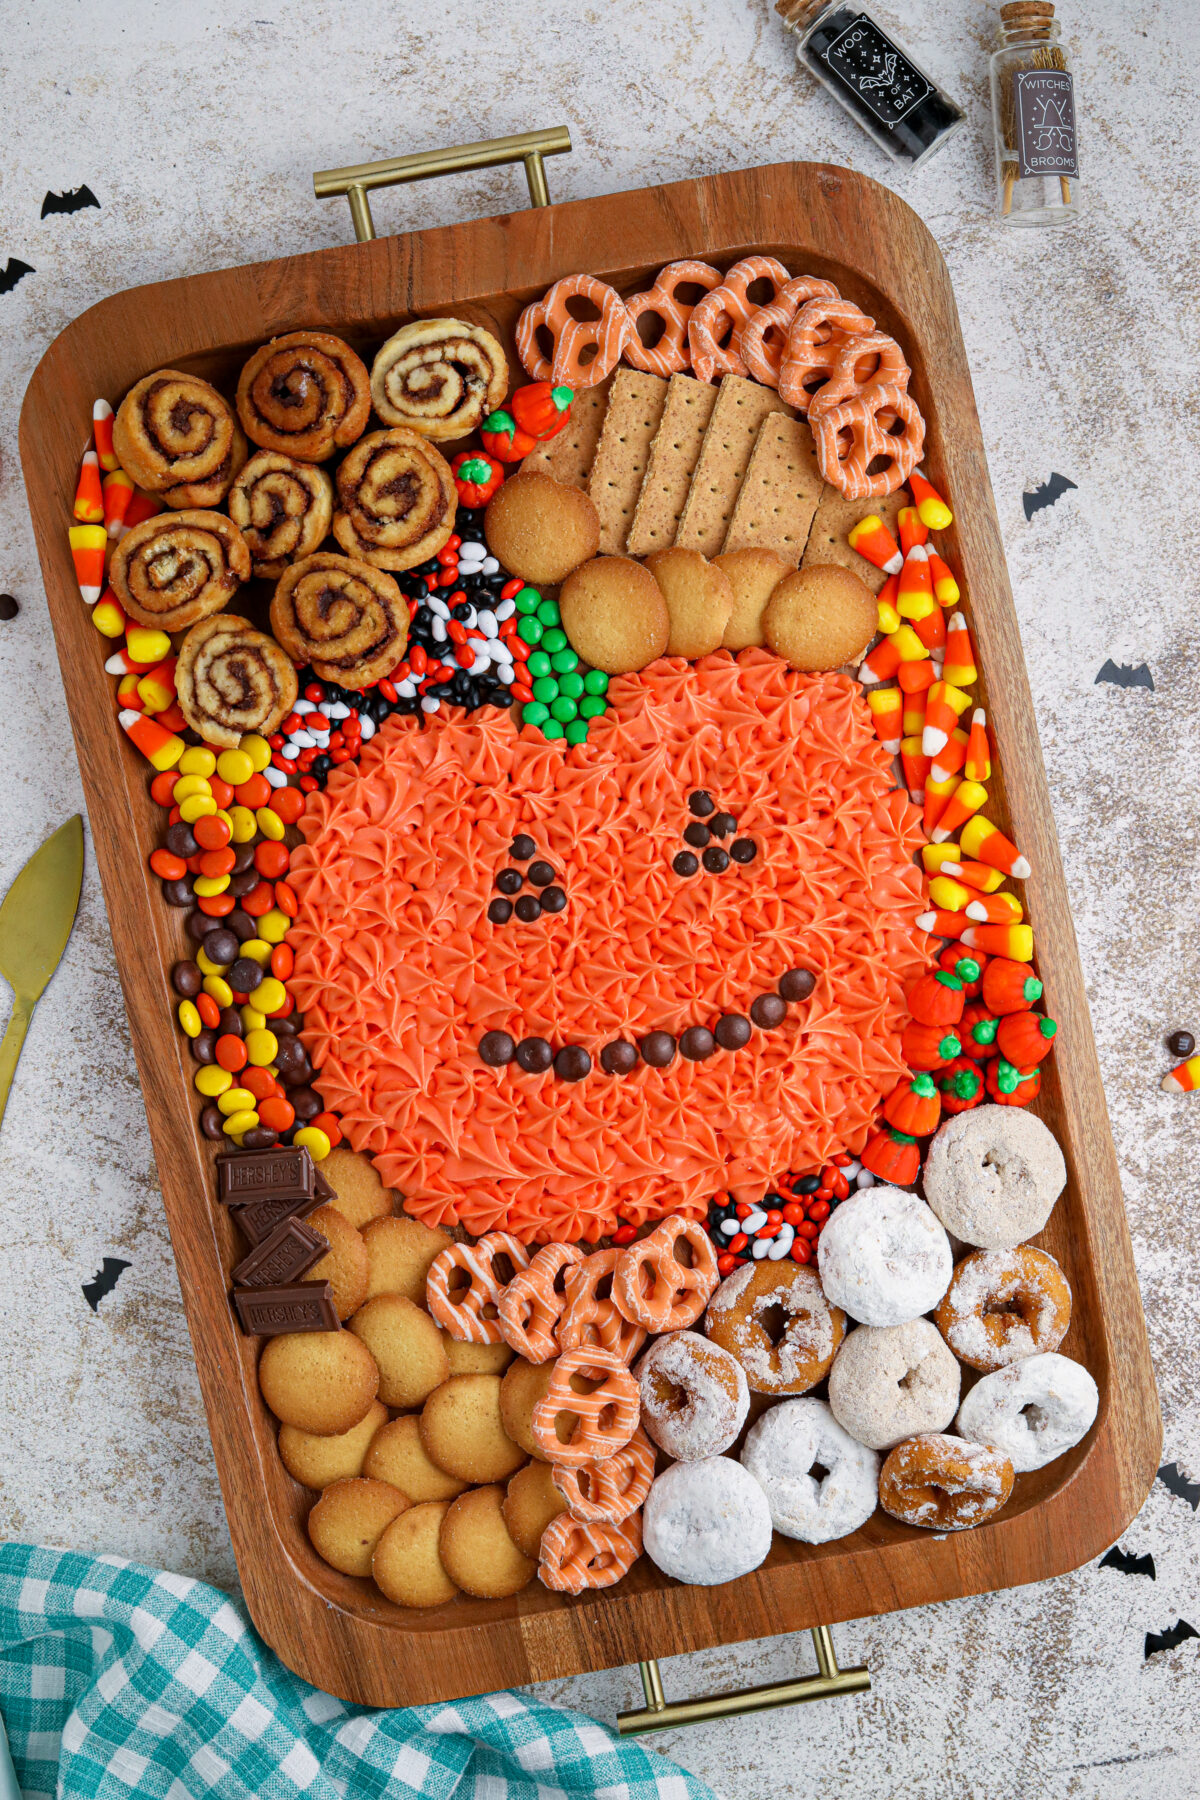 Make your Halloween party one to remember with this easy pumpkin frosting board featuring homemade cream cheese frosting and fun dippers!